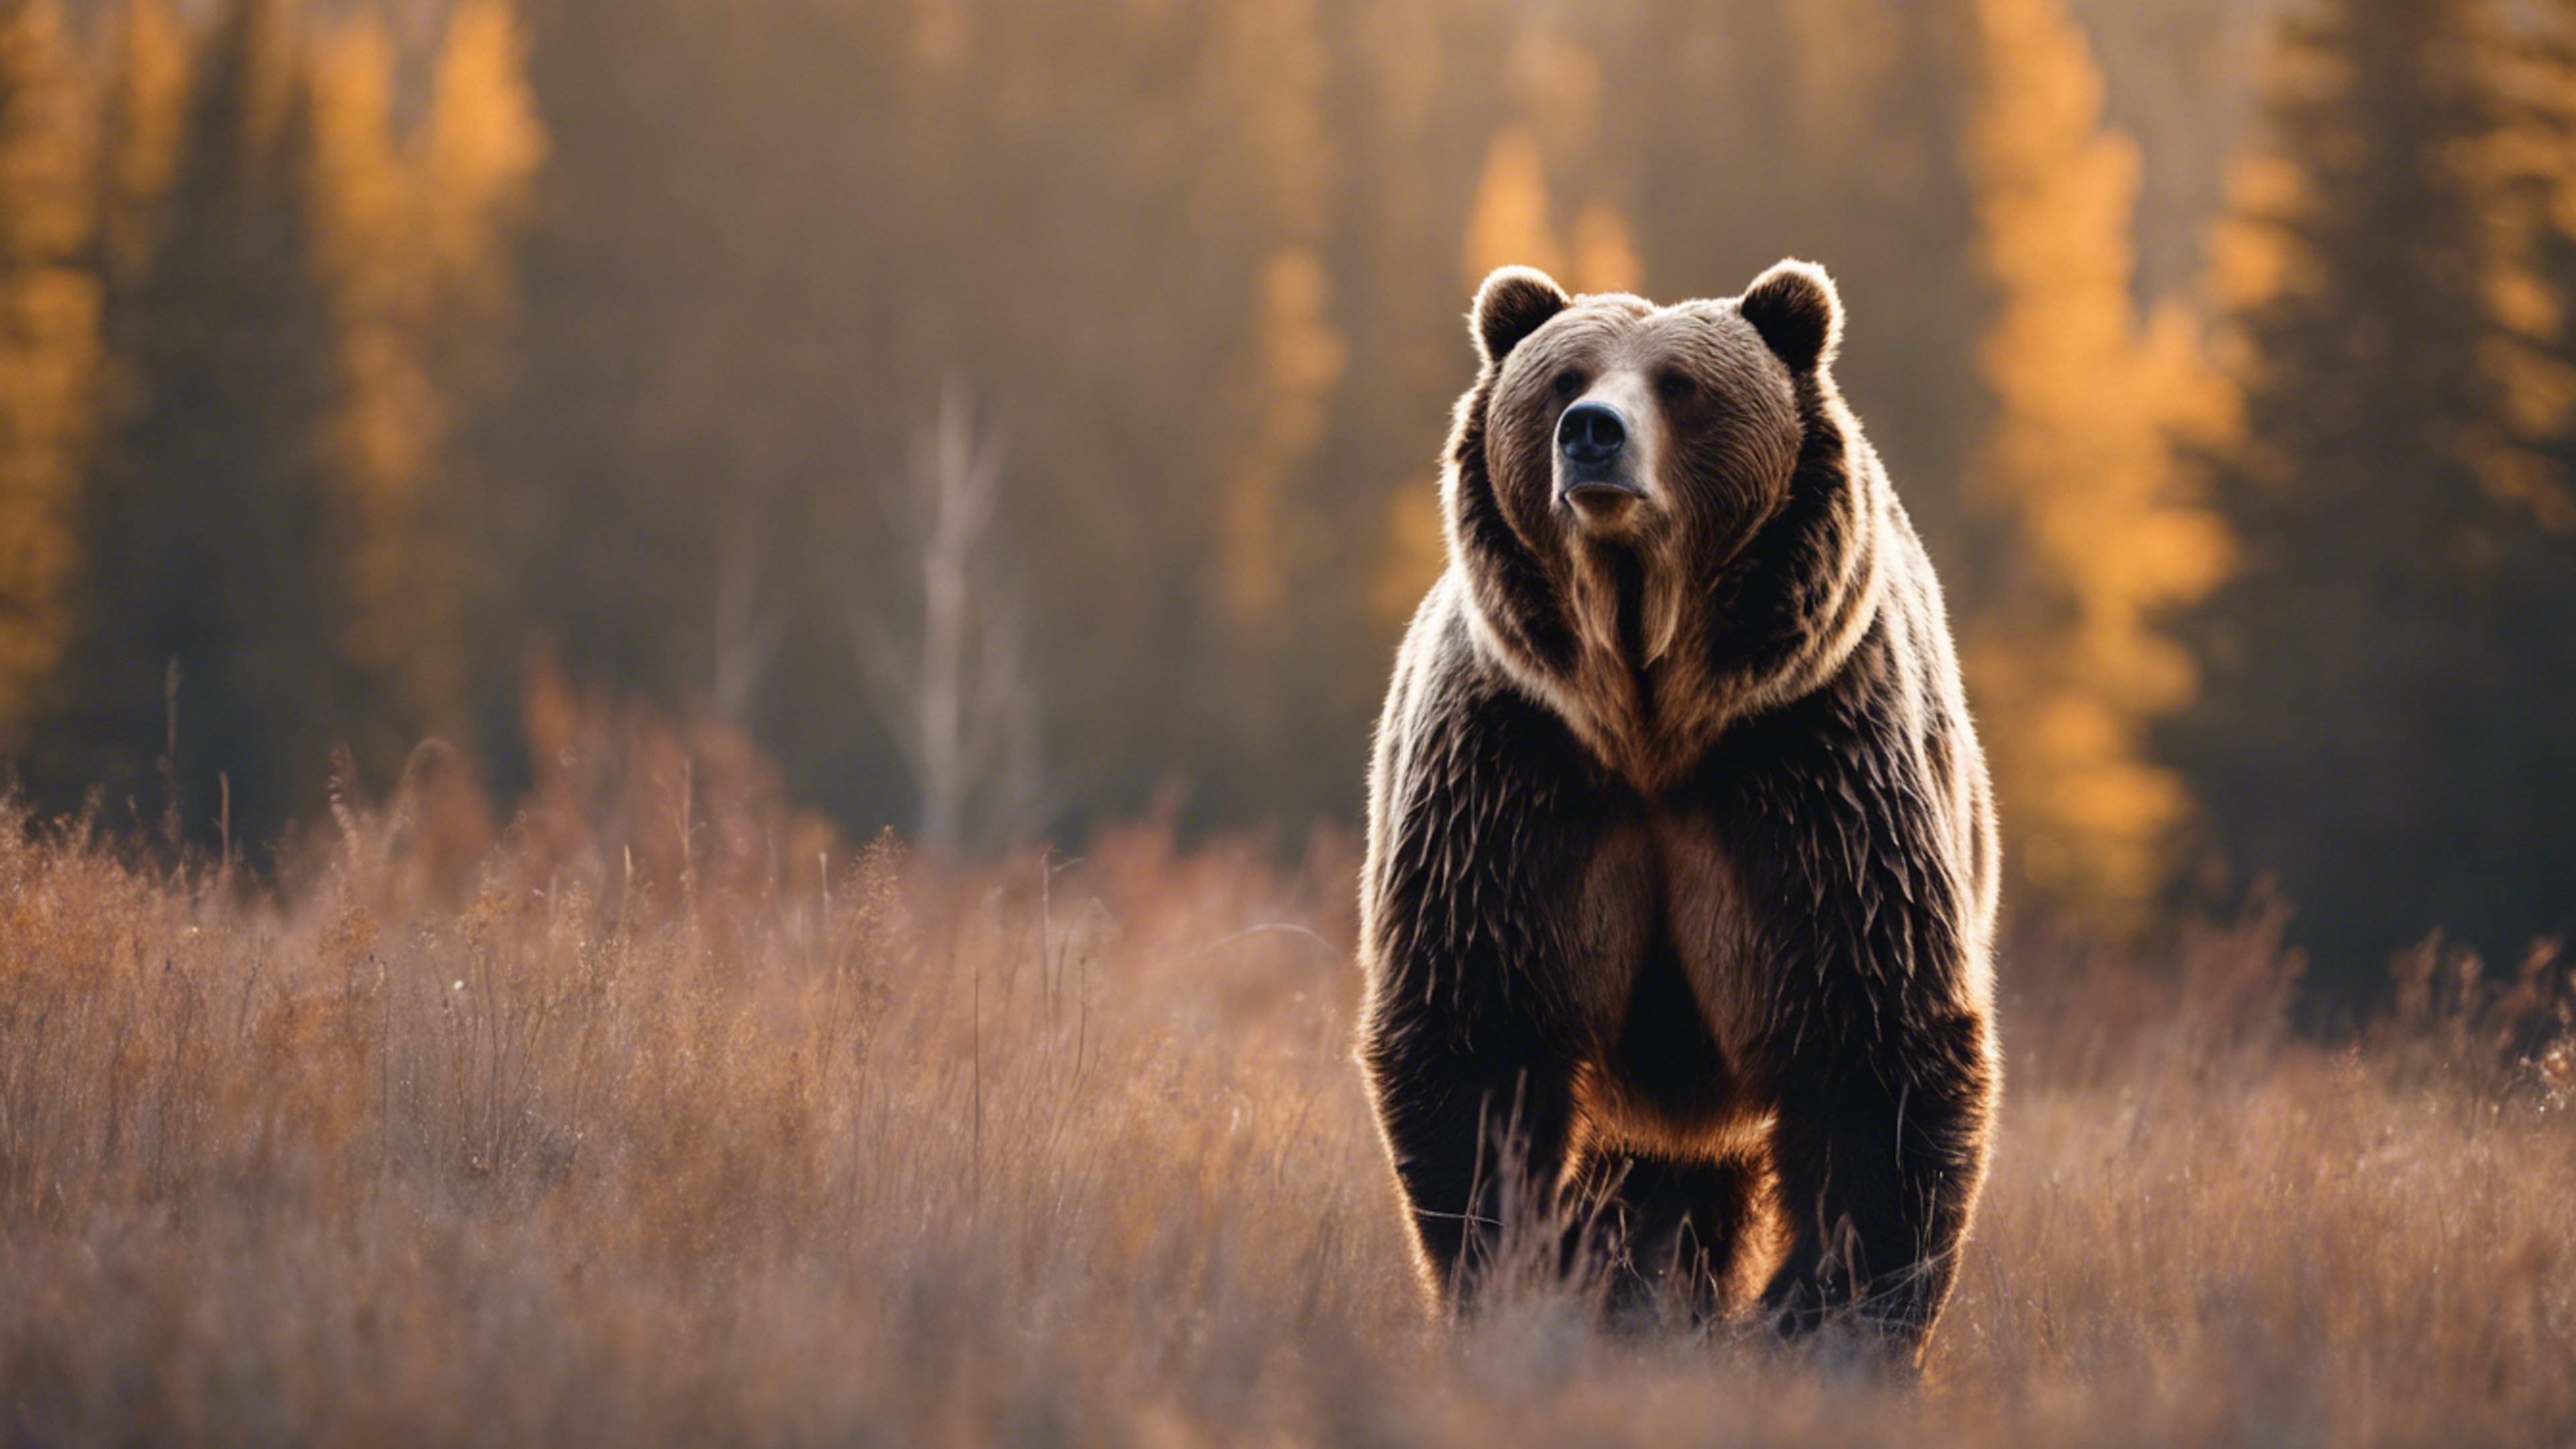 A majestic brown grizzly bear standing tall in the wild Tapeta na zeď[4fb1e3b24f2c4984aff0]